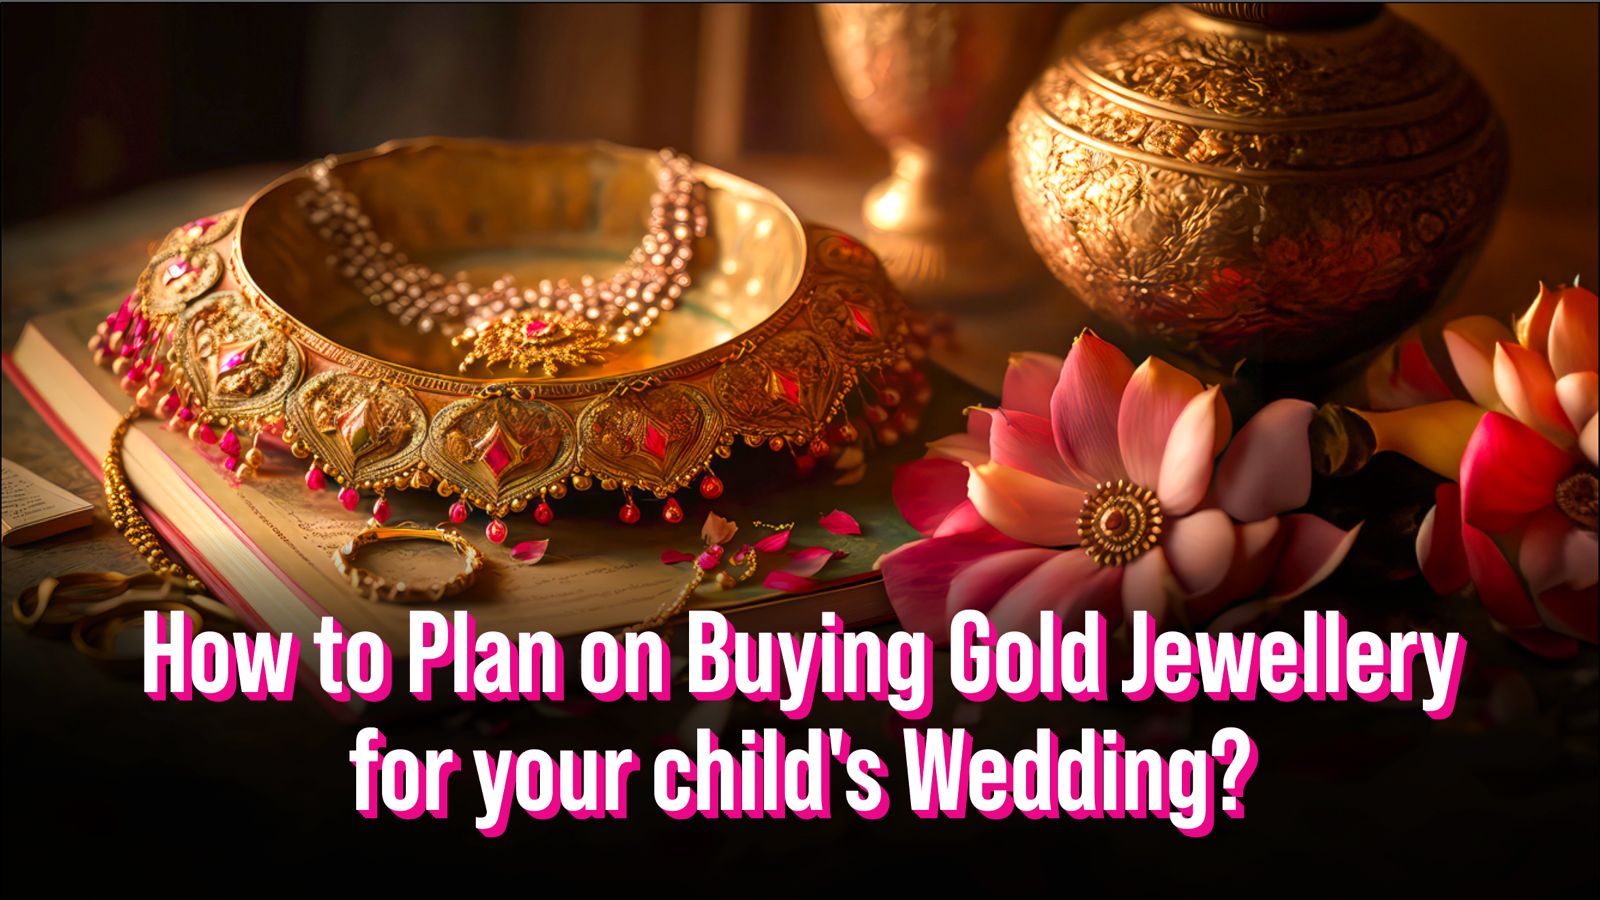 how to plan on buying gold jewelry for your childs wedding?